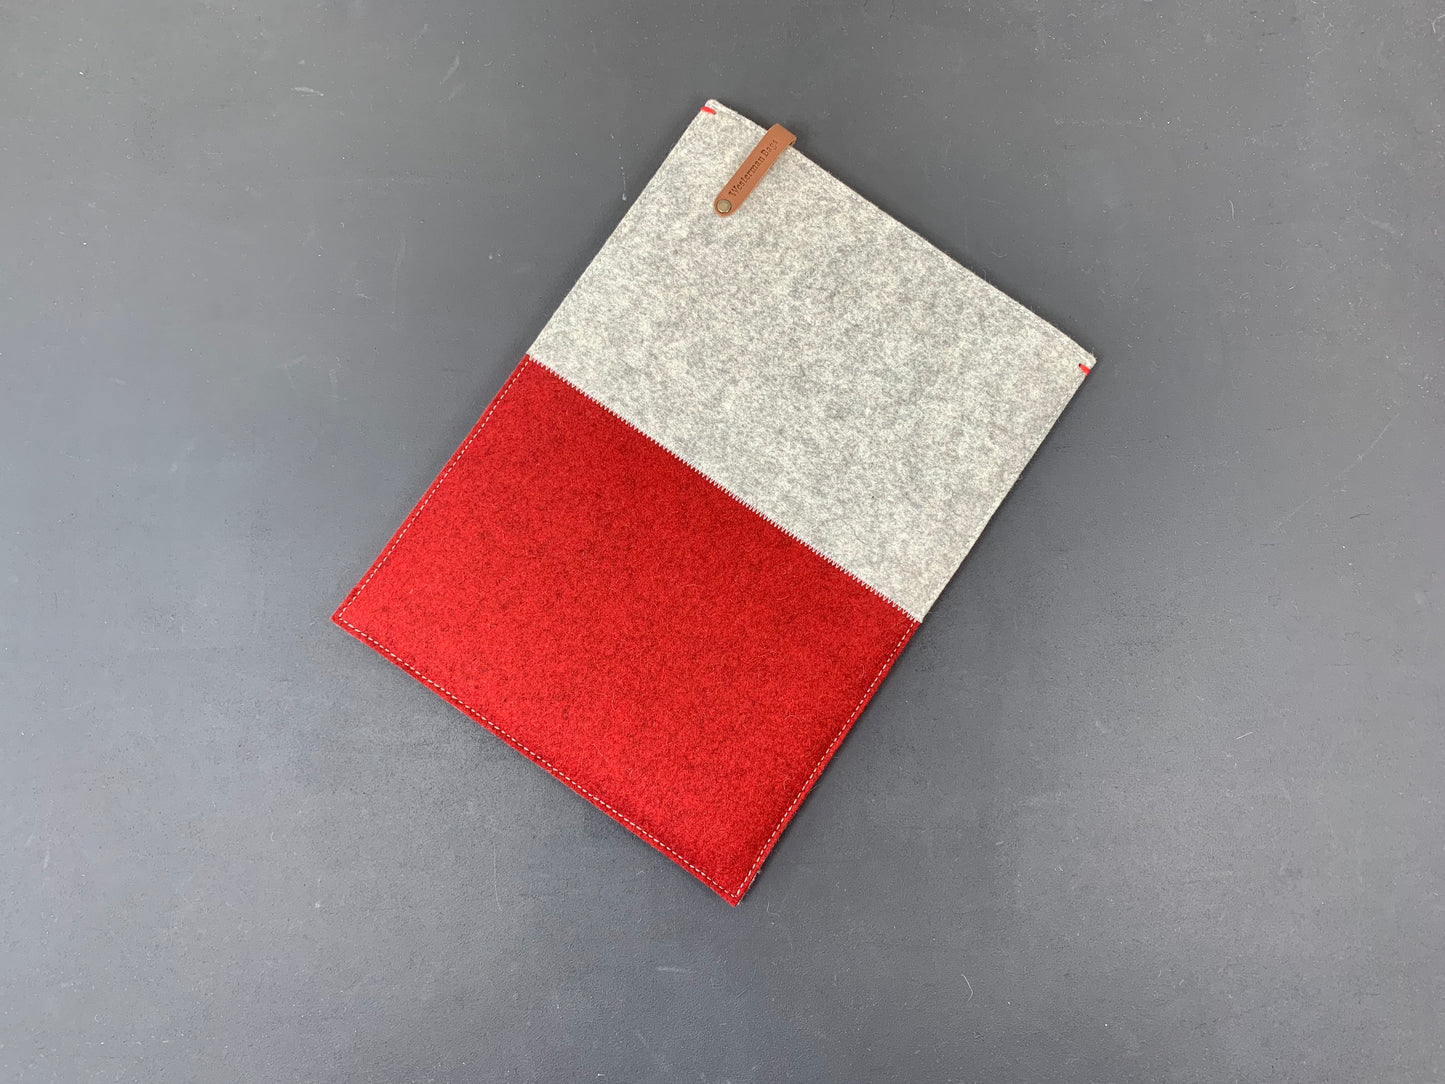 Macbook felt sleeve case in grey and red